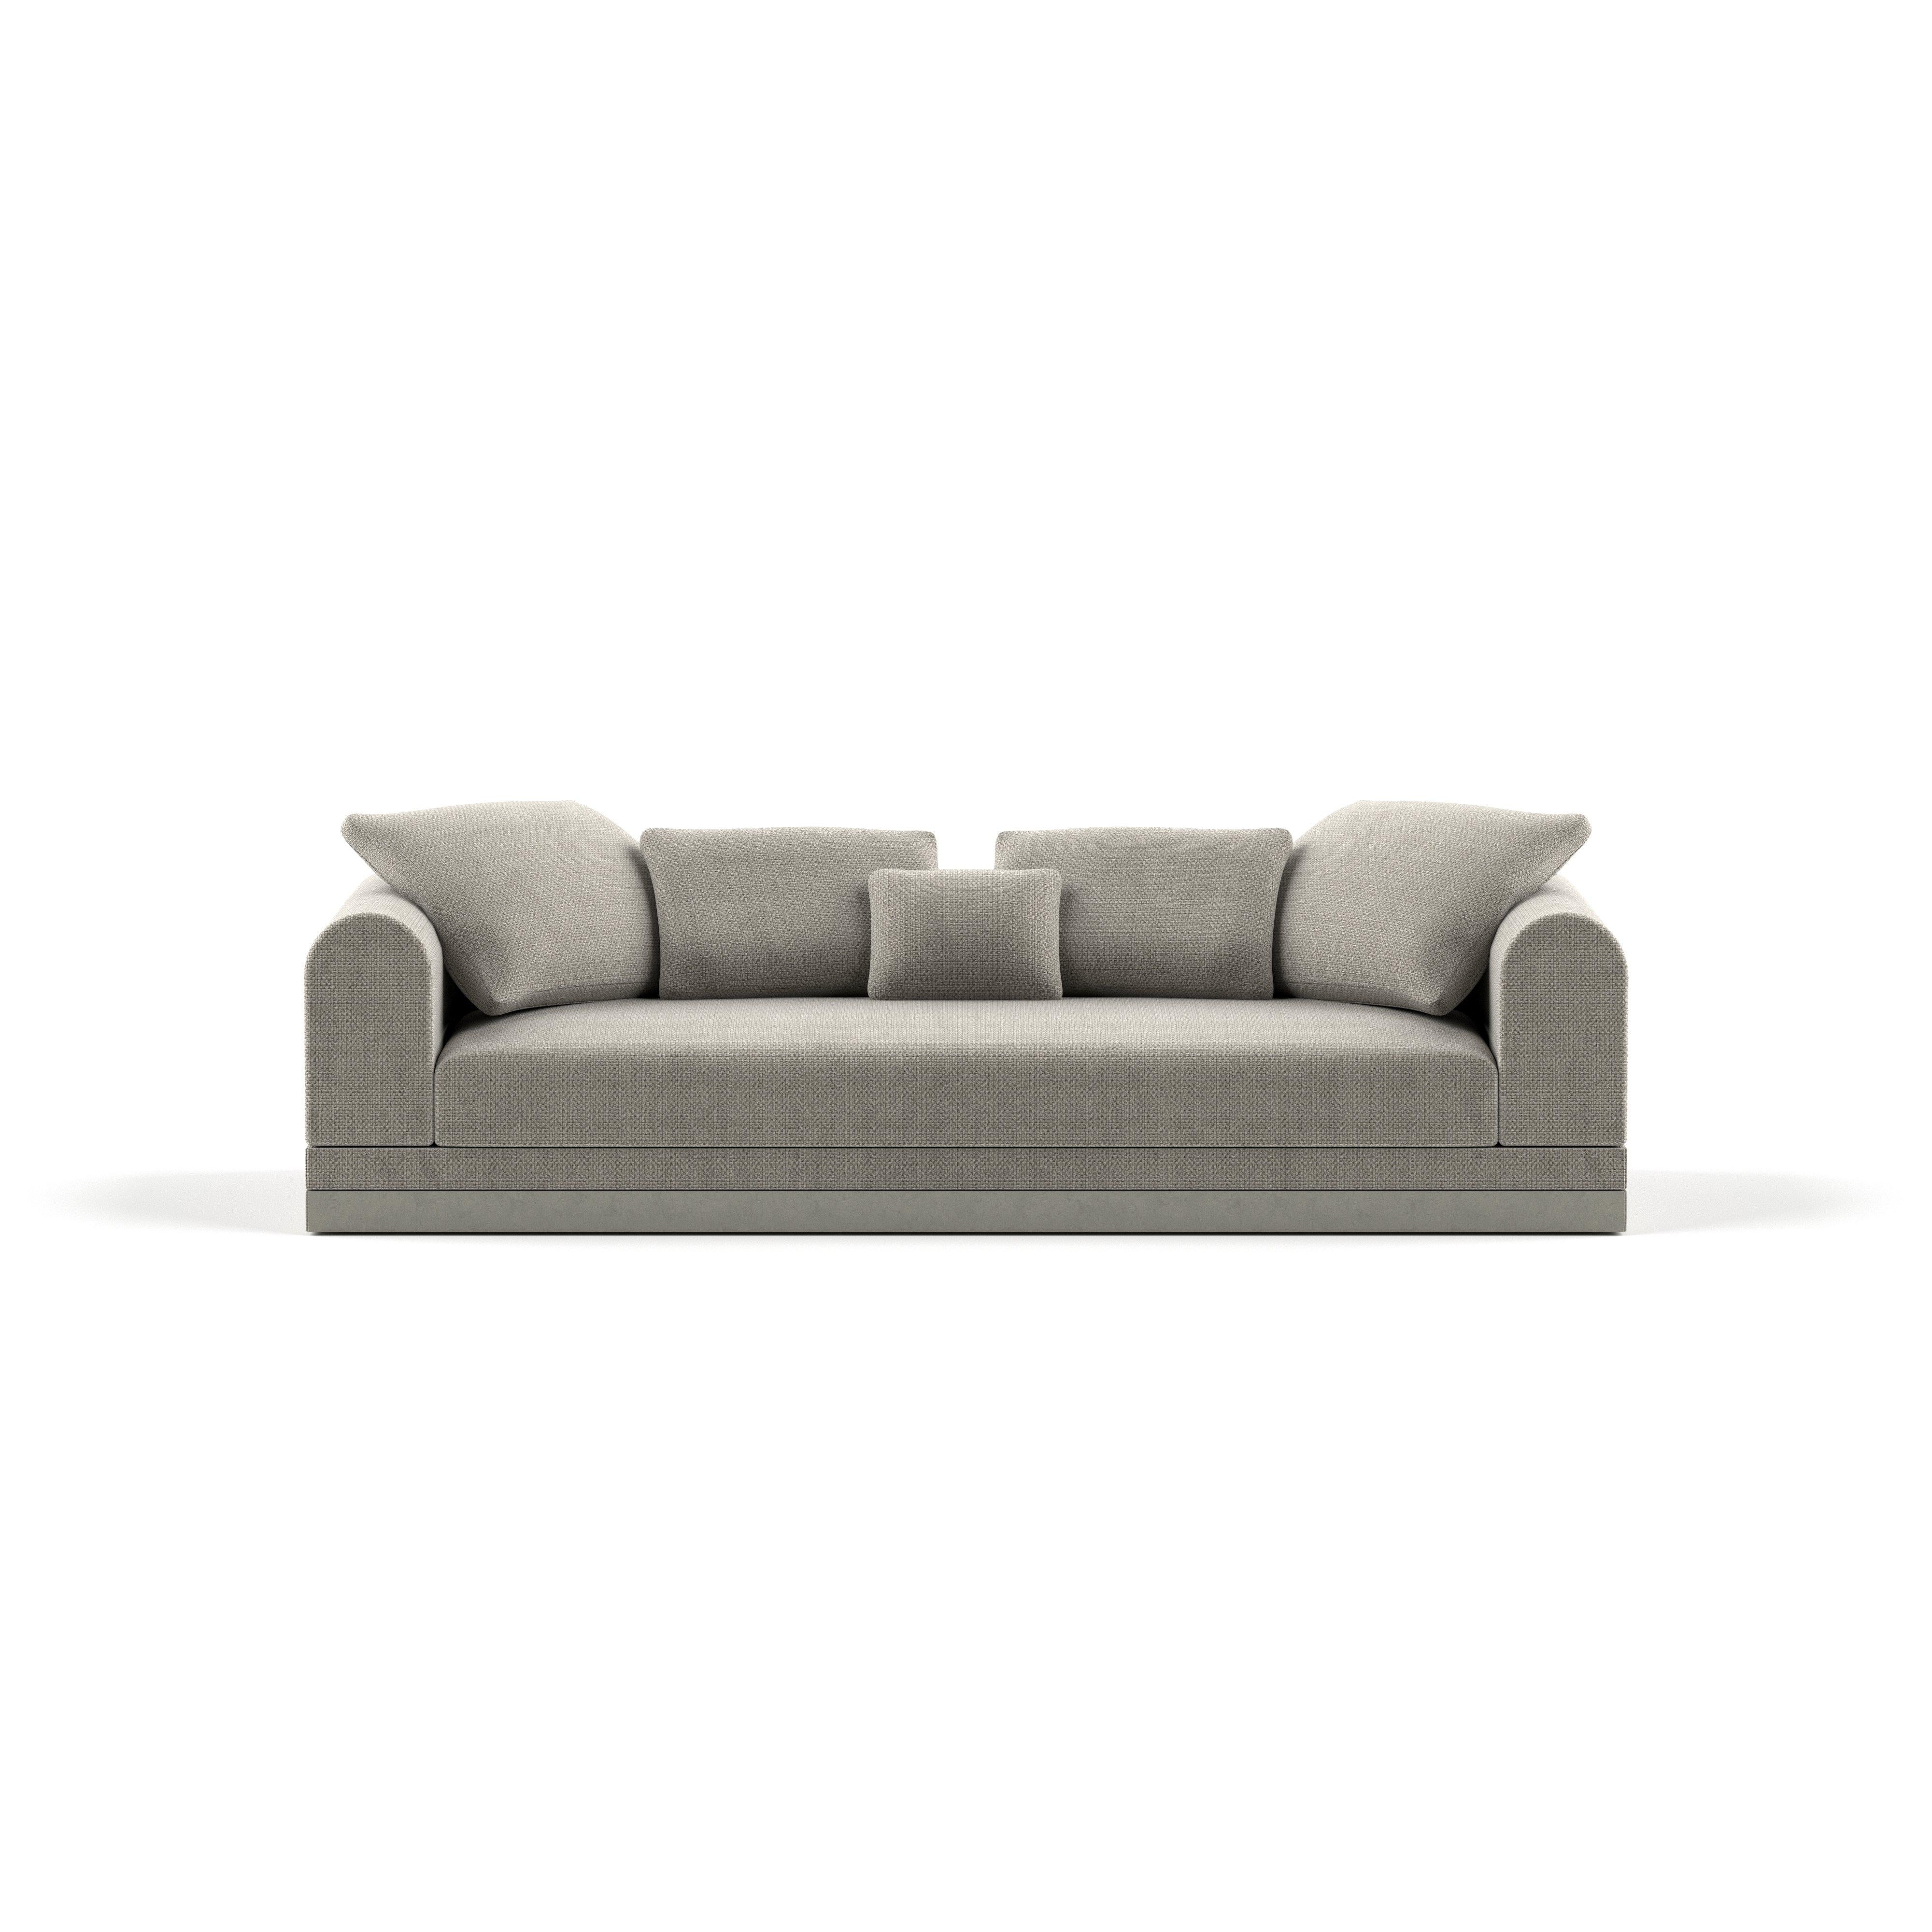 Contemporary Small Sofa 'Aqueduct' by Poiat, Fox 02, Low Plinth For Sale 2